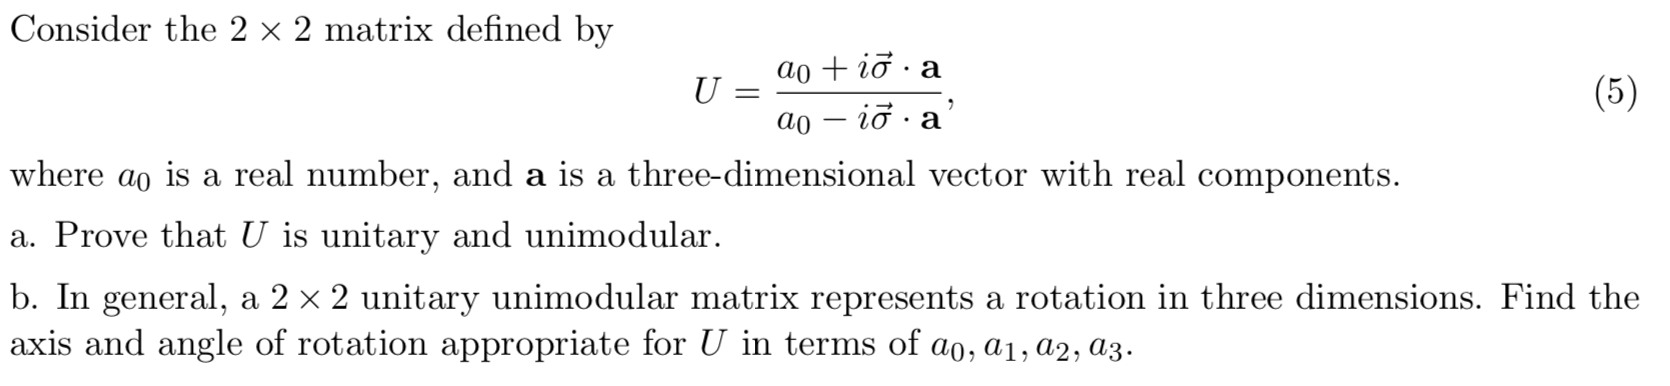 Consider the 2 x 2 matrix defined by
aoi a
U
.
(5)
ао — iд .a
where ao is a real number, and a is a three-dimensional vector with real components.
a. Prove that U is unitary and unimodular
b. In general, a 2 x 2 unitary unimodular matrix represents a rotation in three dimensions. Find the
axis and angle of rotation appropriate for U in terms of ao, ai, a2, a3
